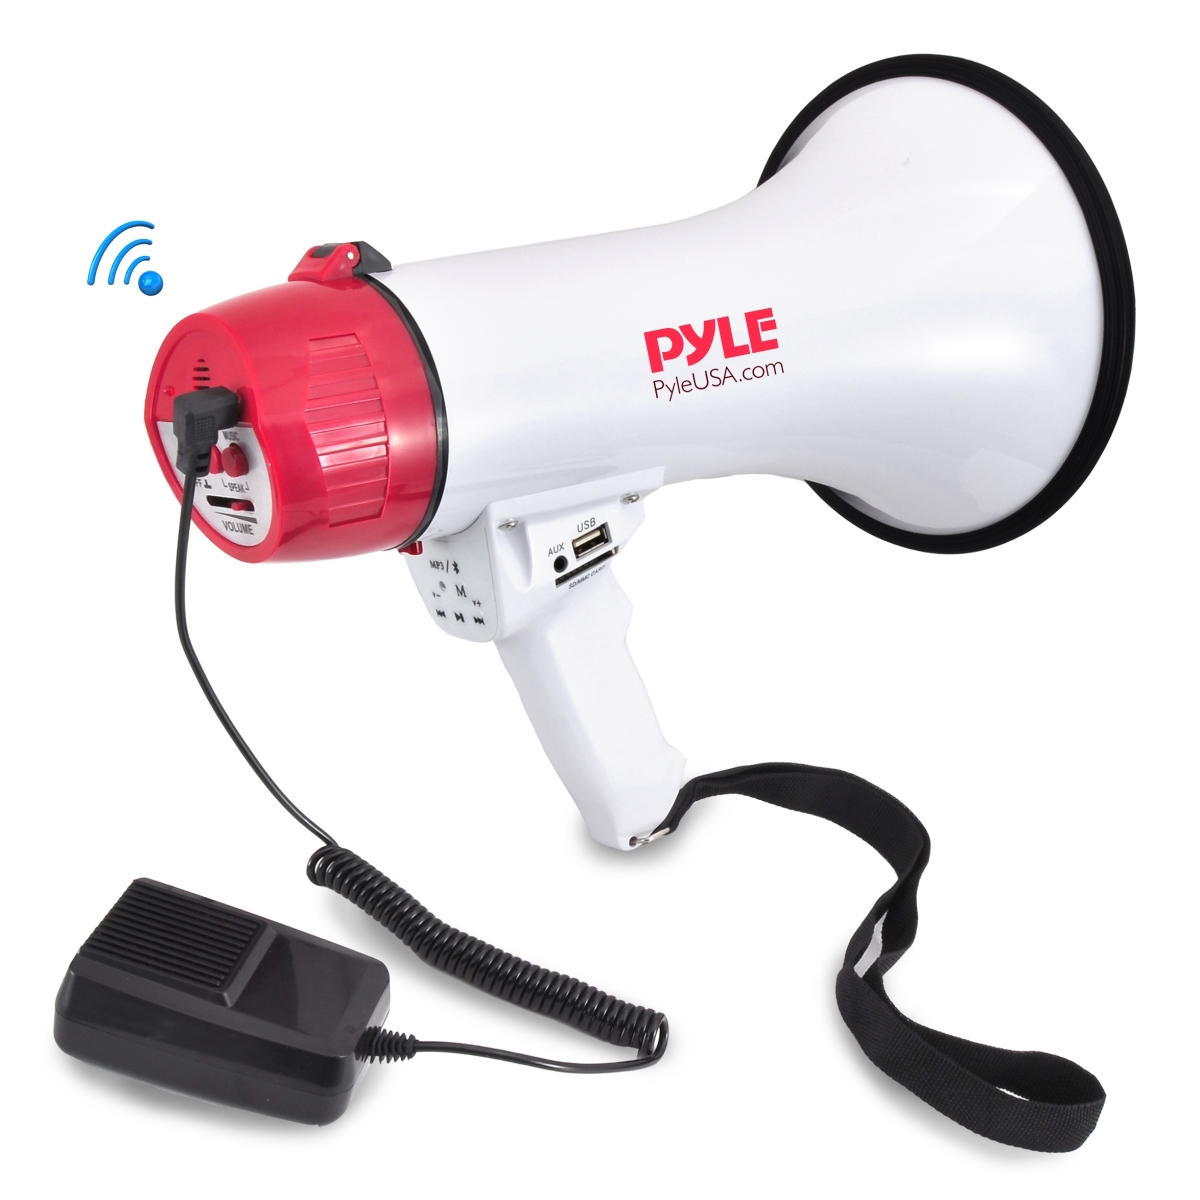 Pyle USA YP5287 Bluetooth Megaphone - PA Megaphone Speaker with Wired Microphone -  PENRAY COMPANIES, PMP42BT